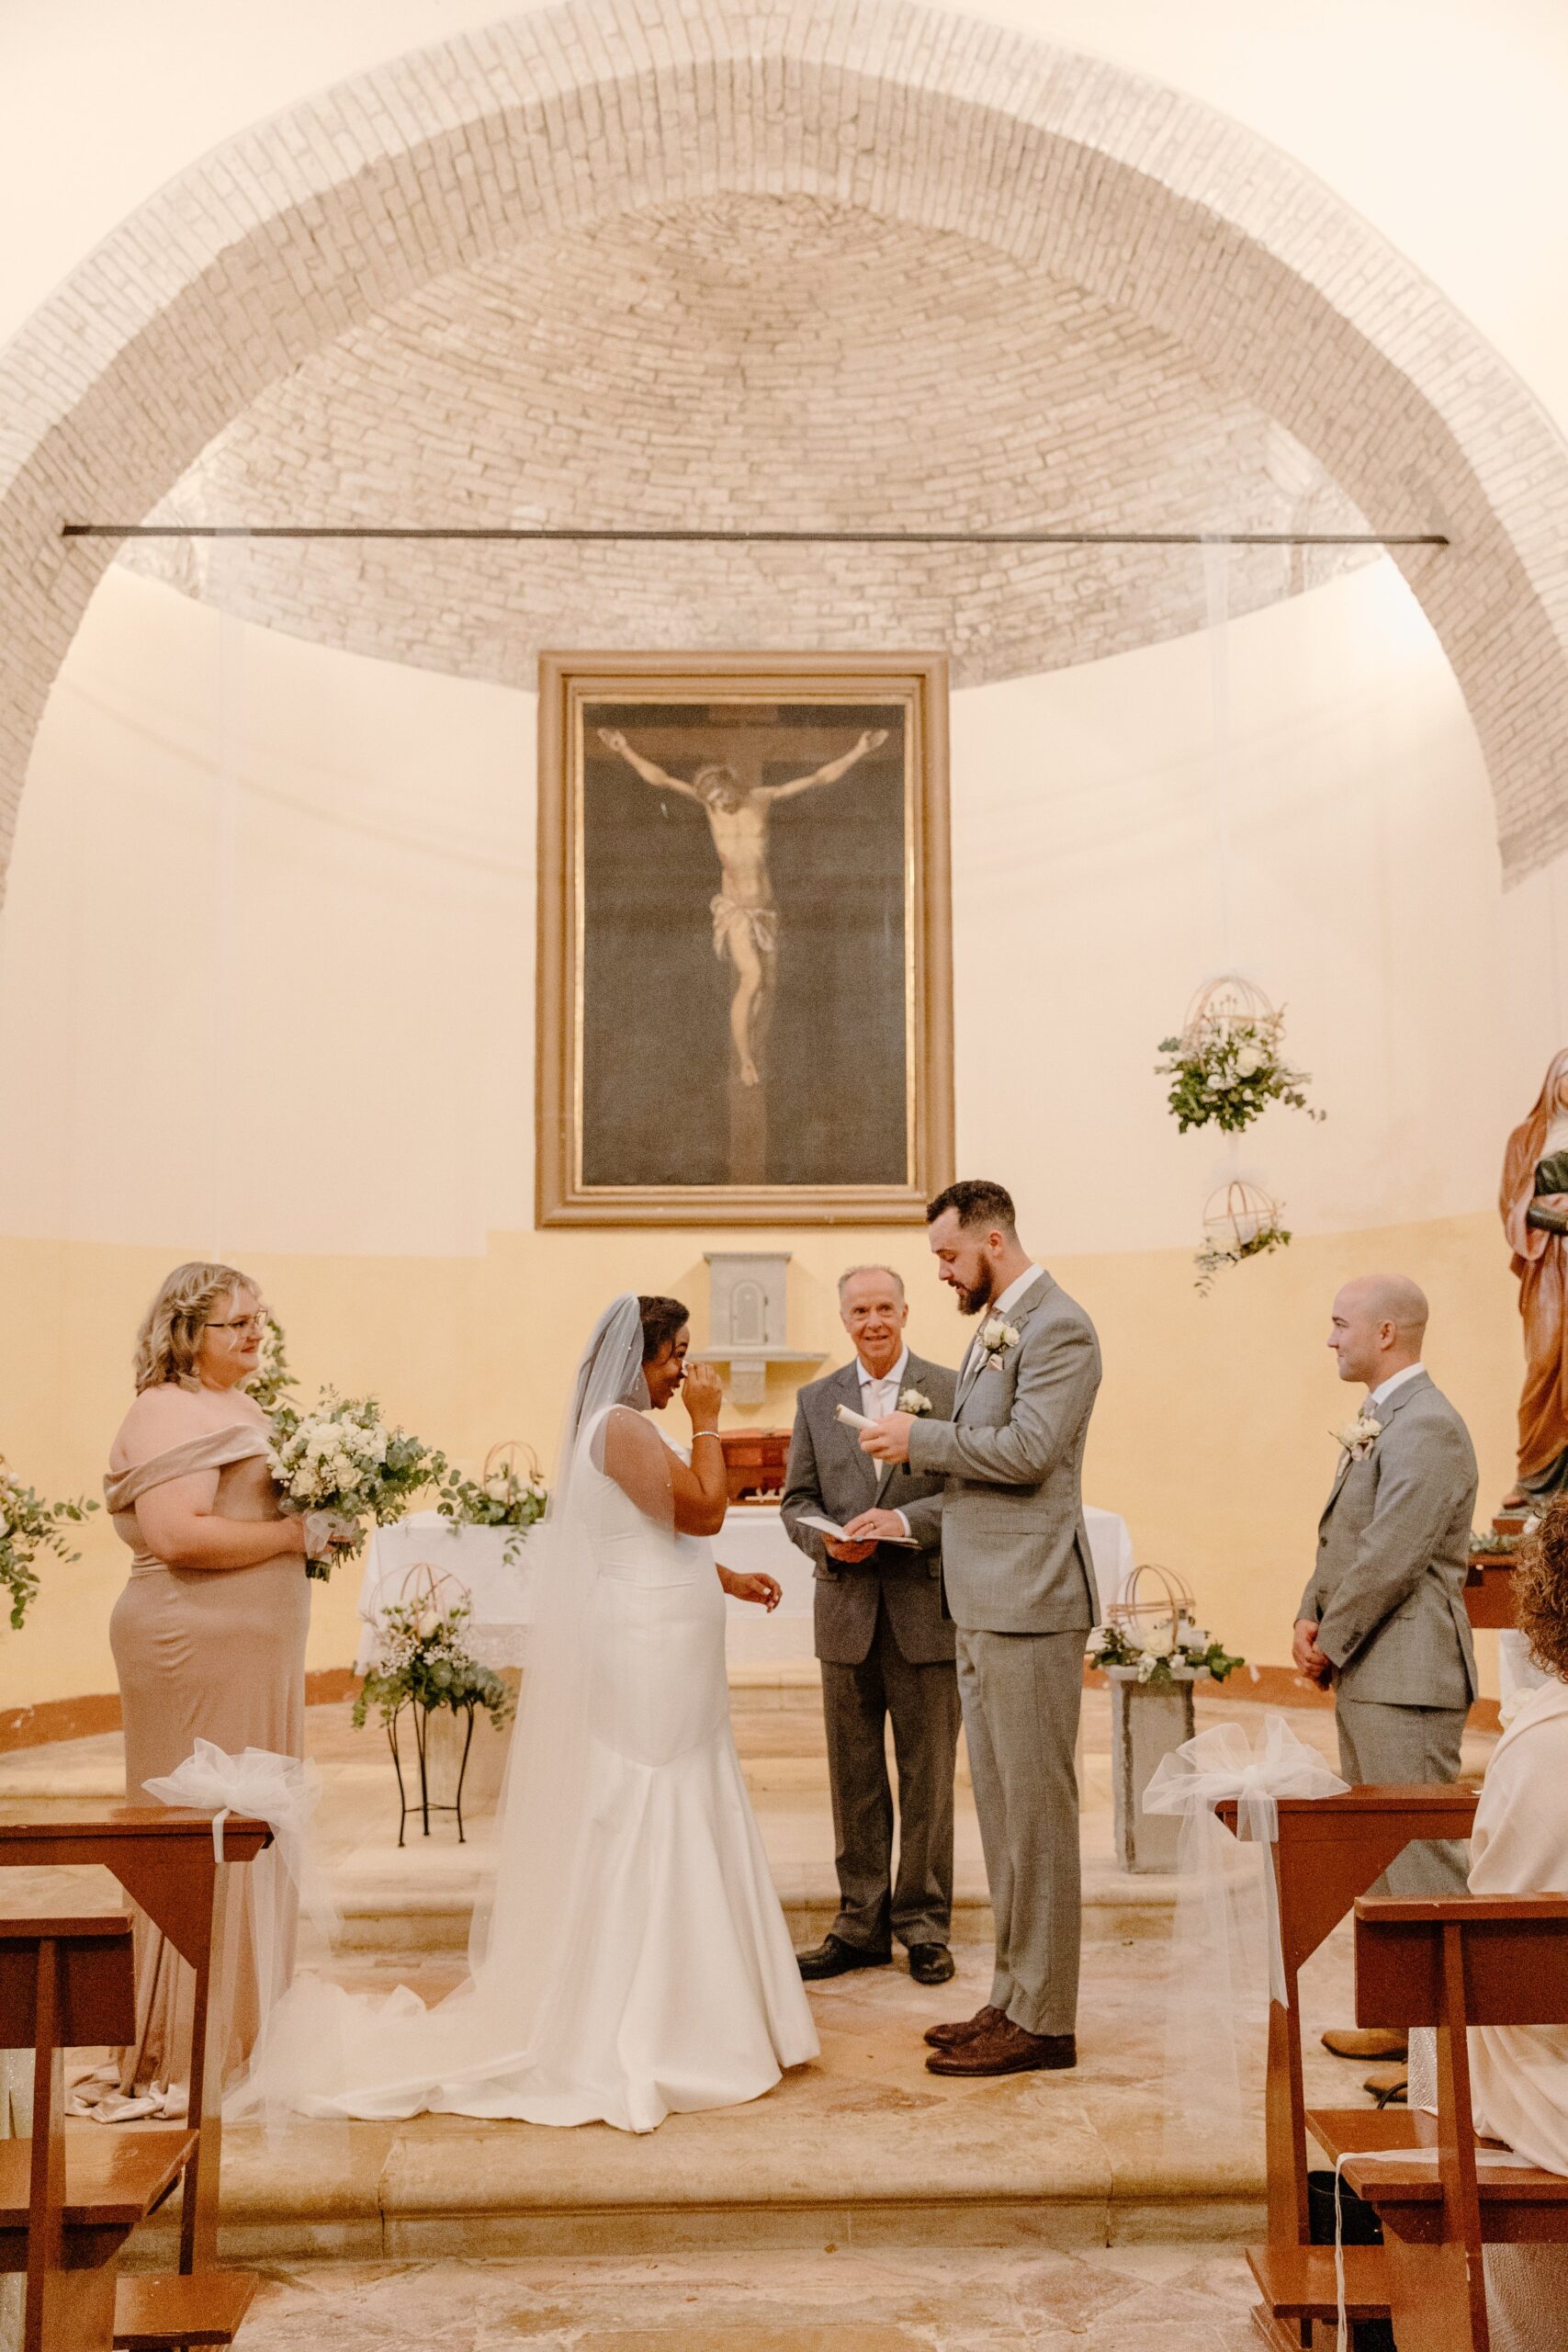 Saying Vows at Elopement Ceremony at Chapel in Italy